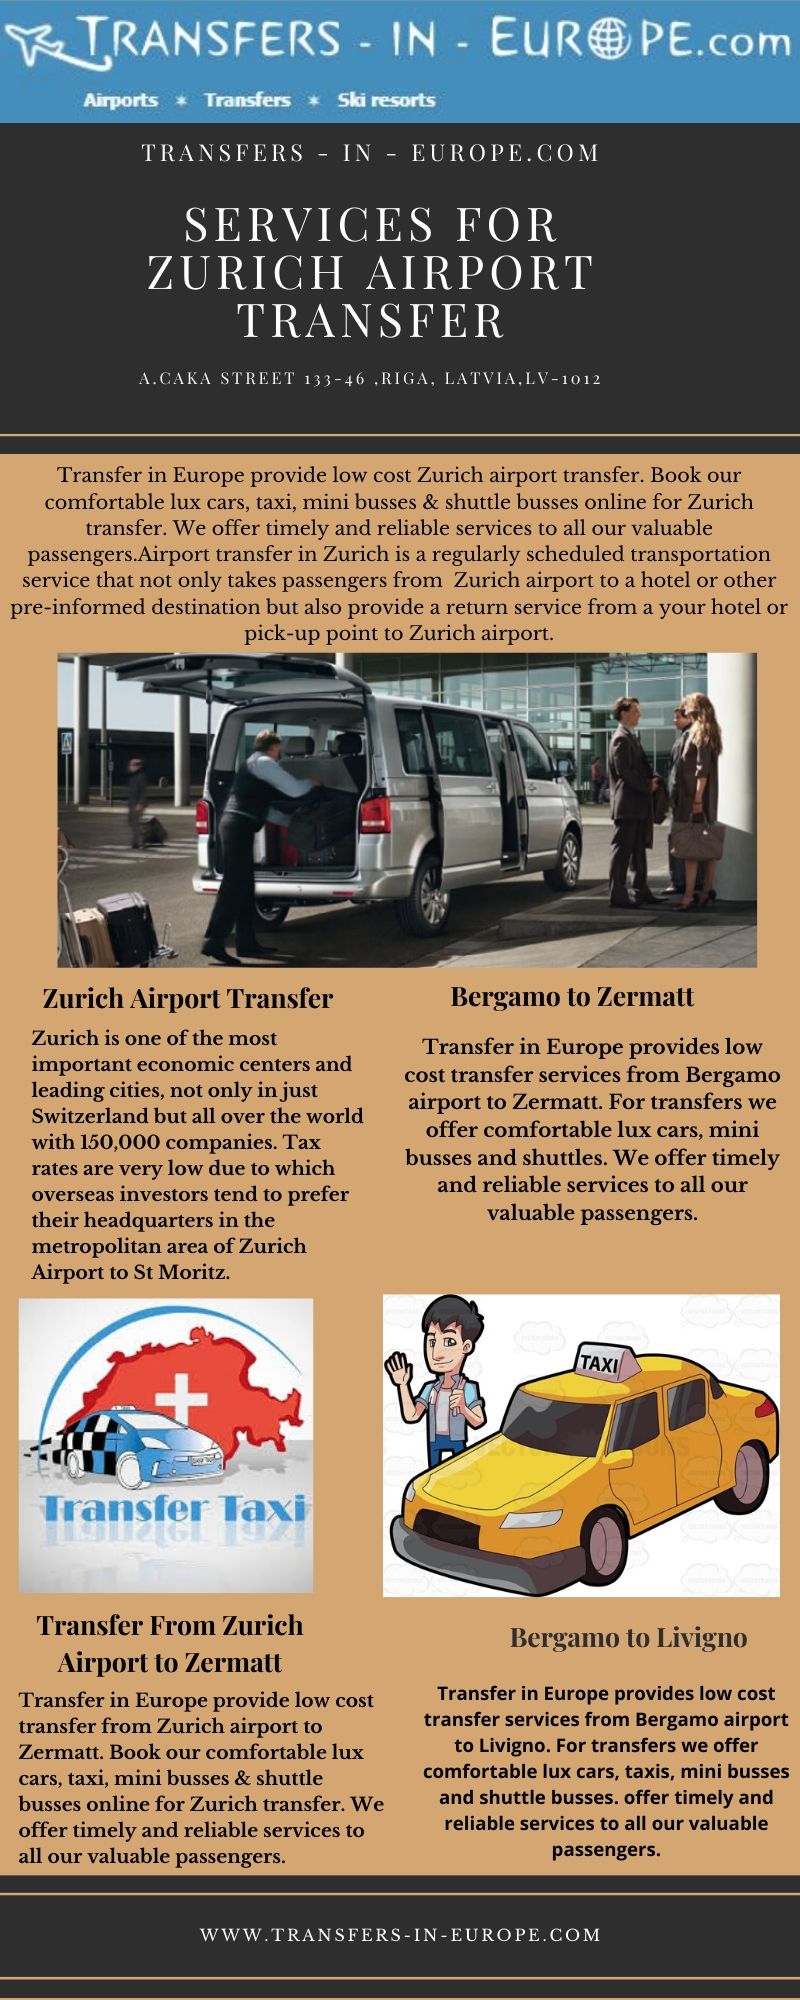 Services for Zurich Airport Transfer.jpg  by transfersineurope